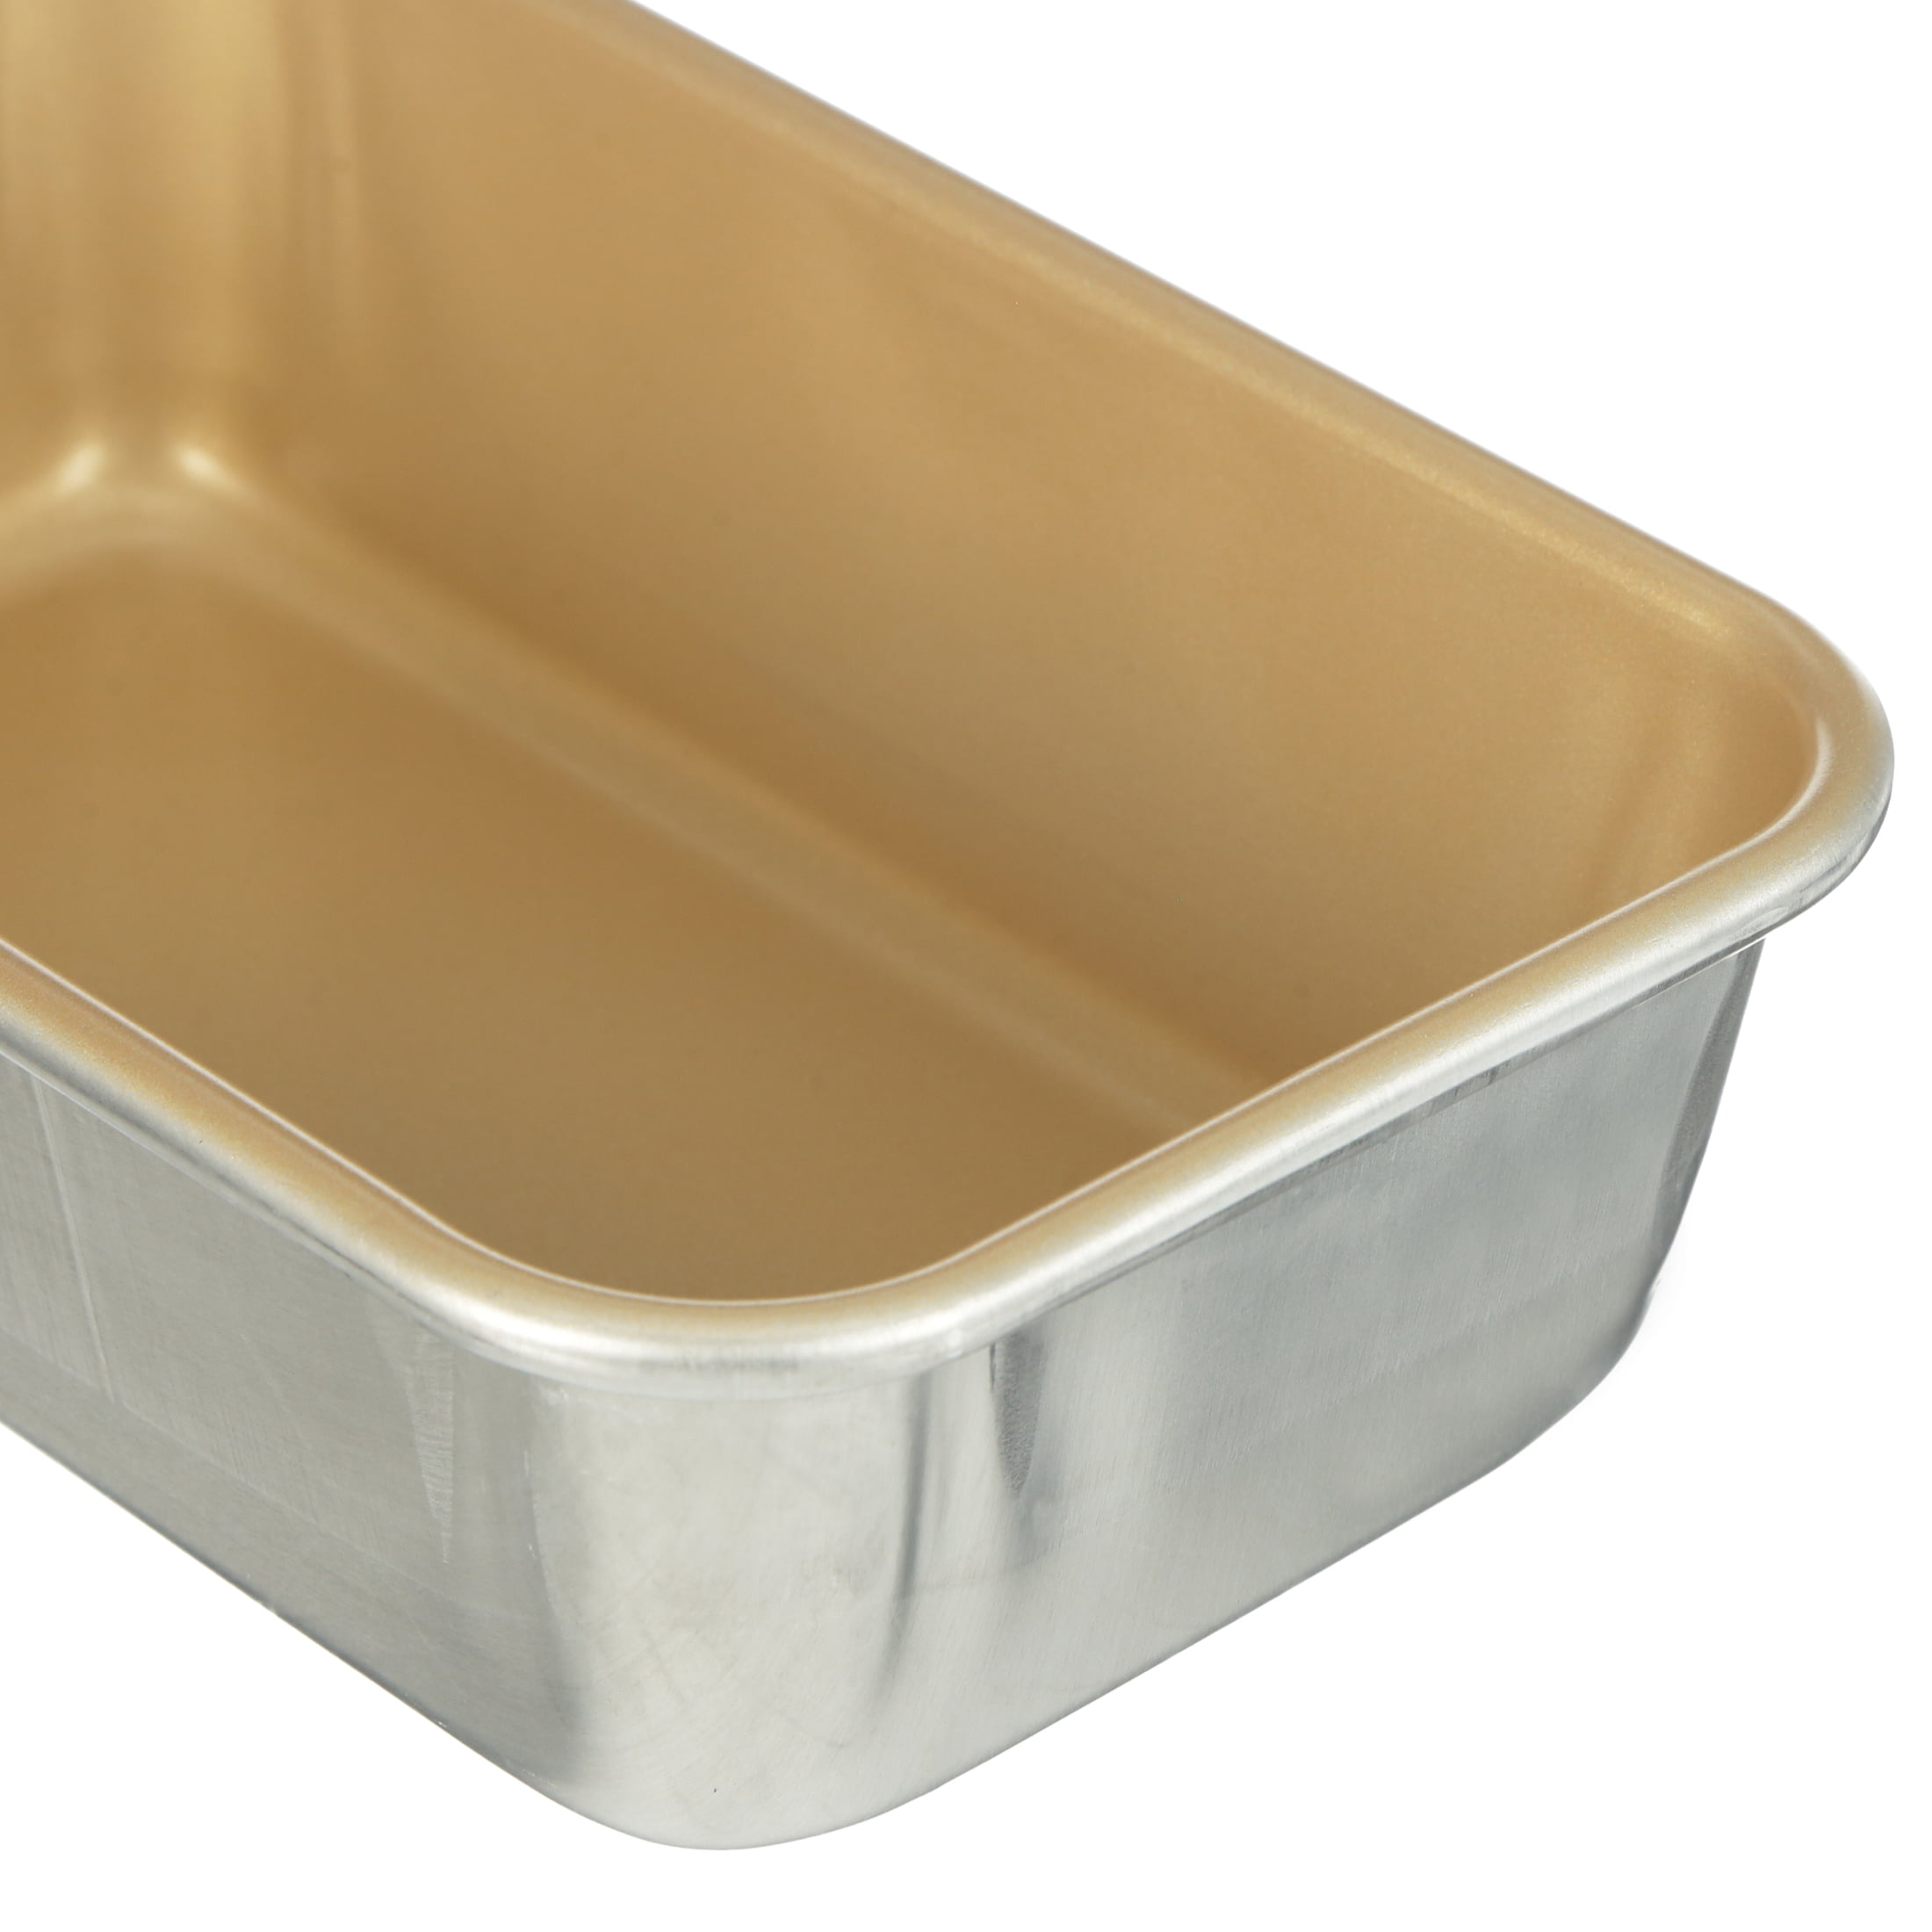 Nordic Ware Classic Cast Aluminum Loaf Pan, 1 - Fry's Food Stores